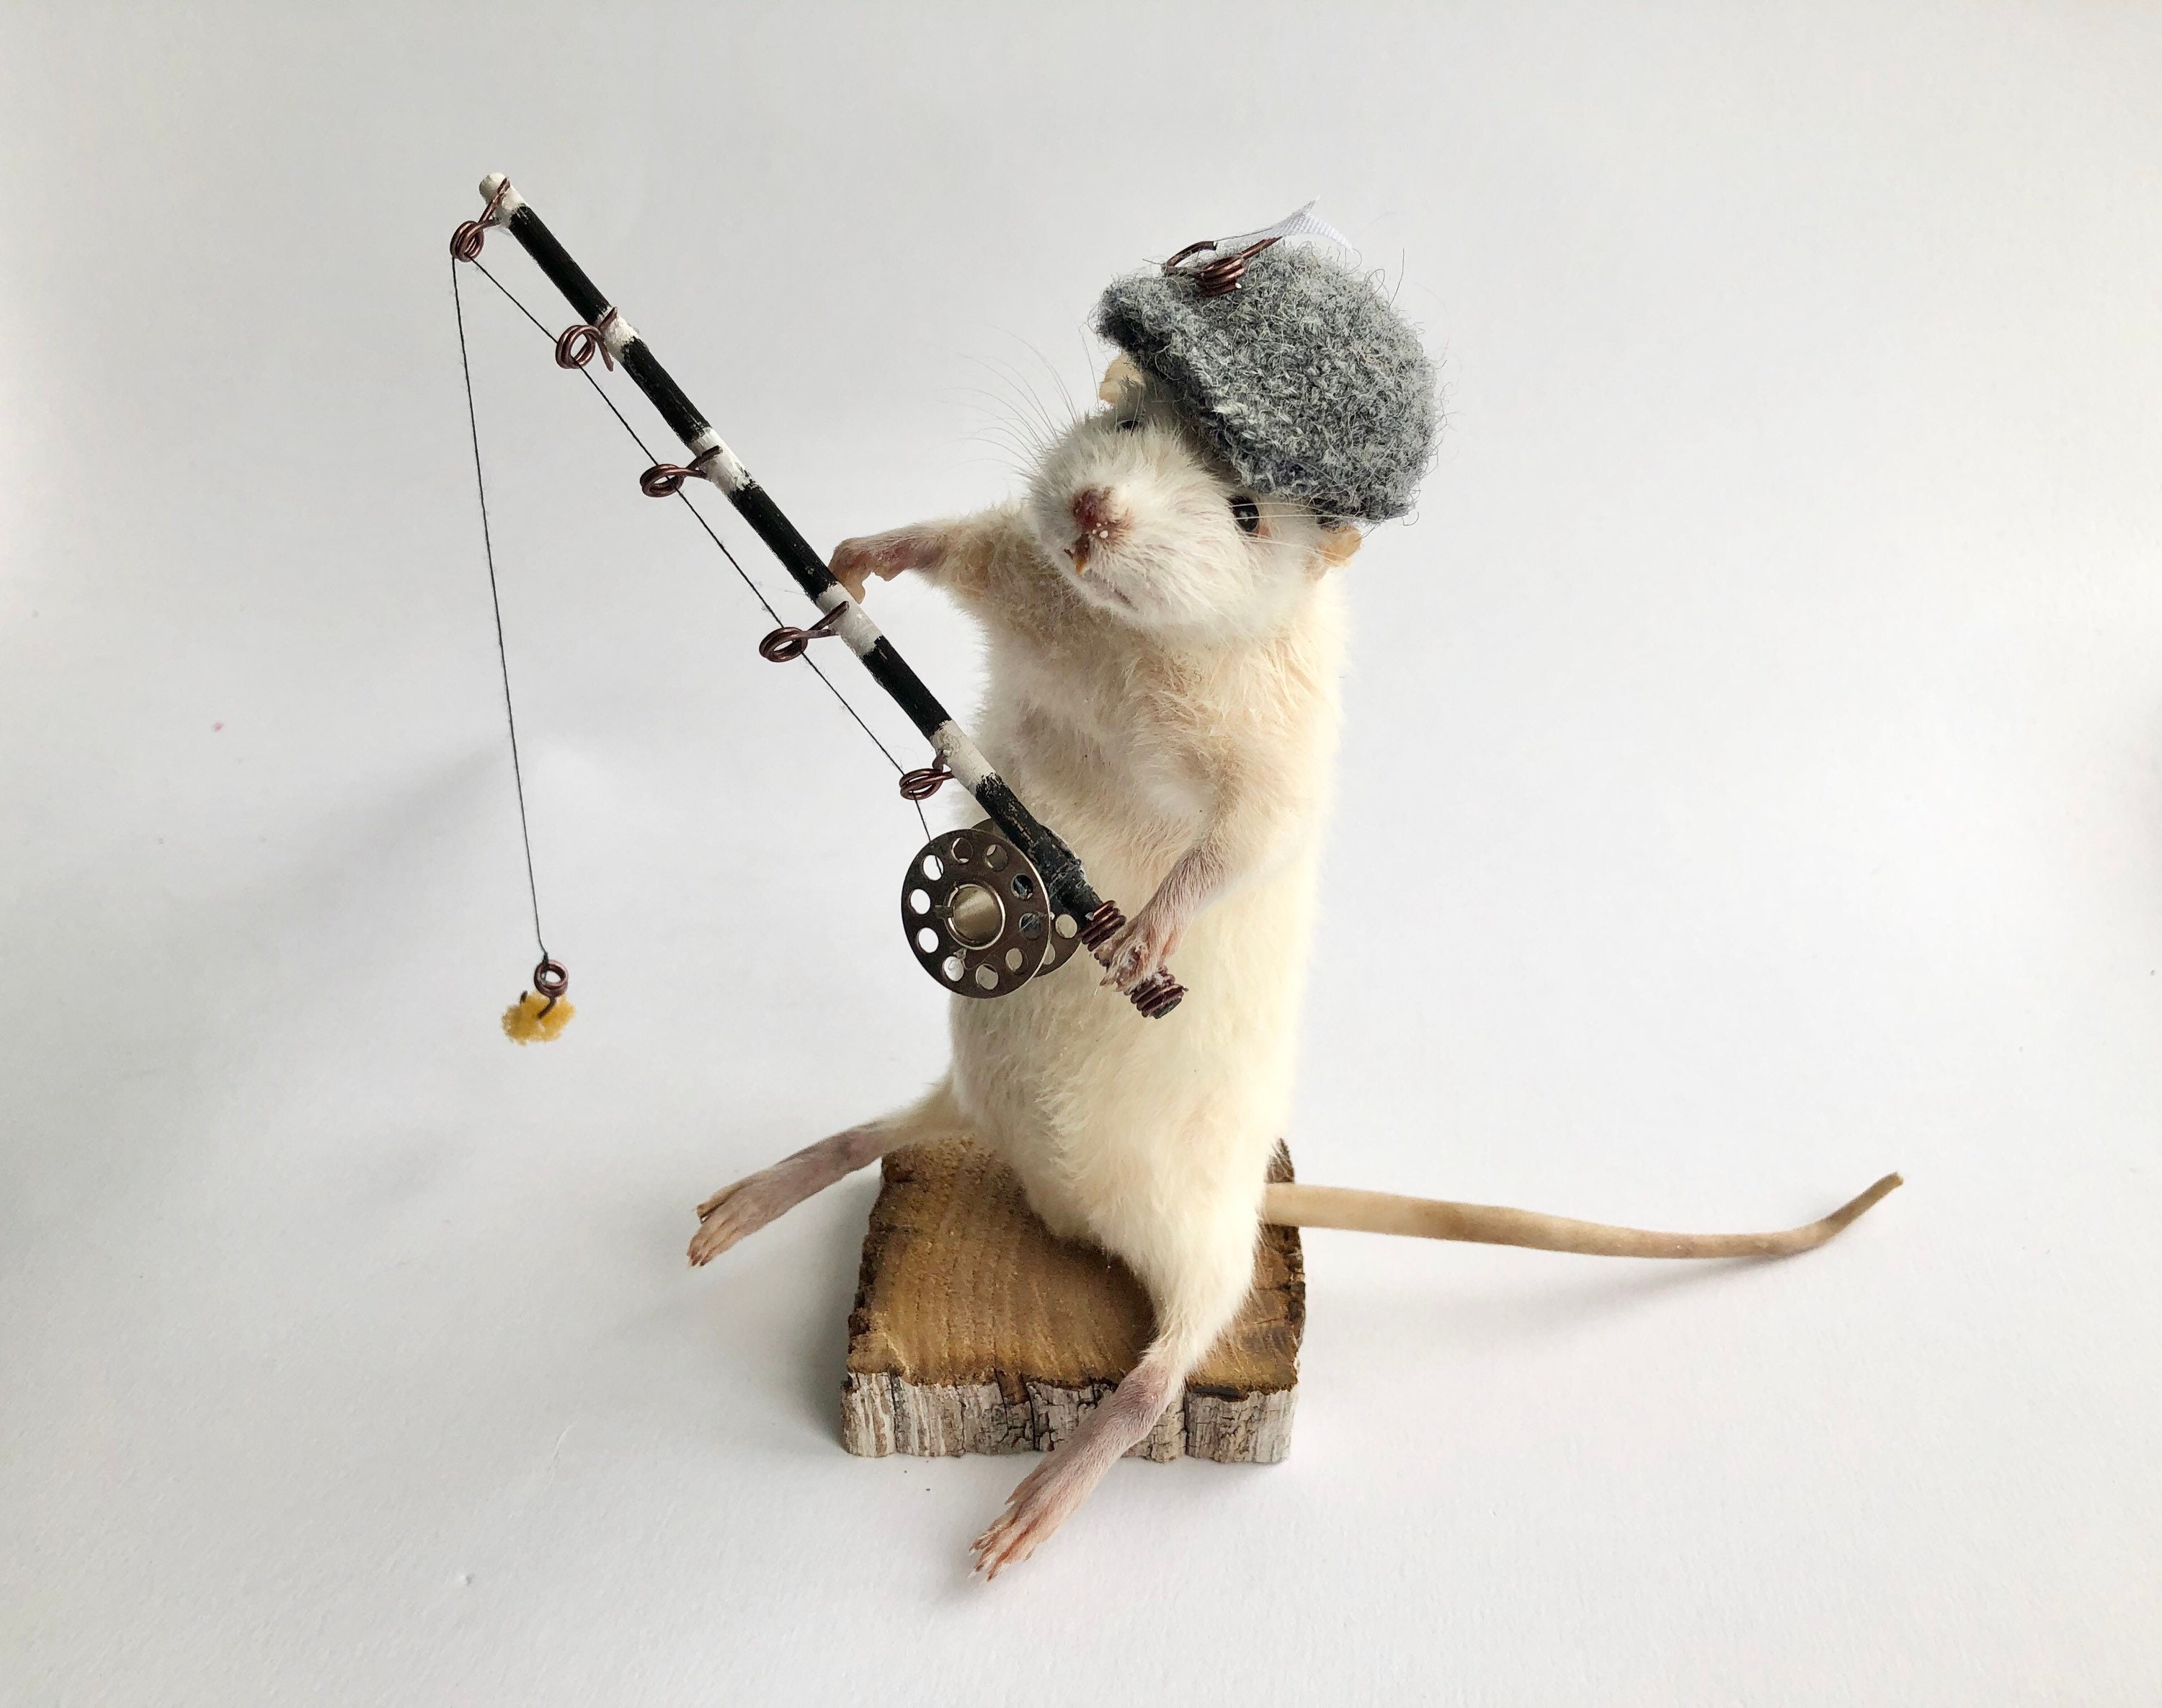 Taxidermy Fishing Mouse, Unique, Cute, Novelty, Oddities, Curiosity,  Quirky, Unique, Handmade, Different, Fun, Special Gift. for Him, Funny 